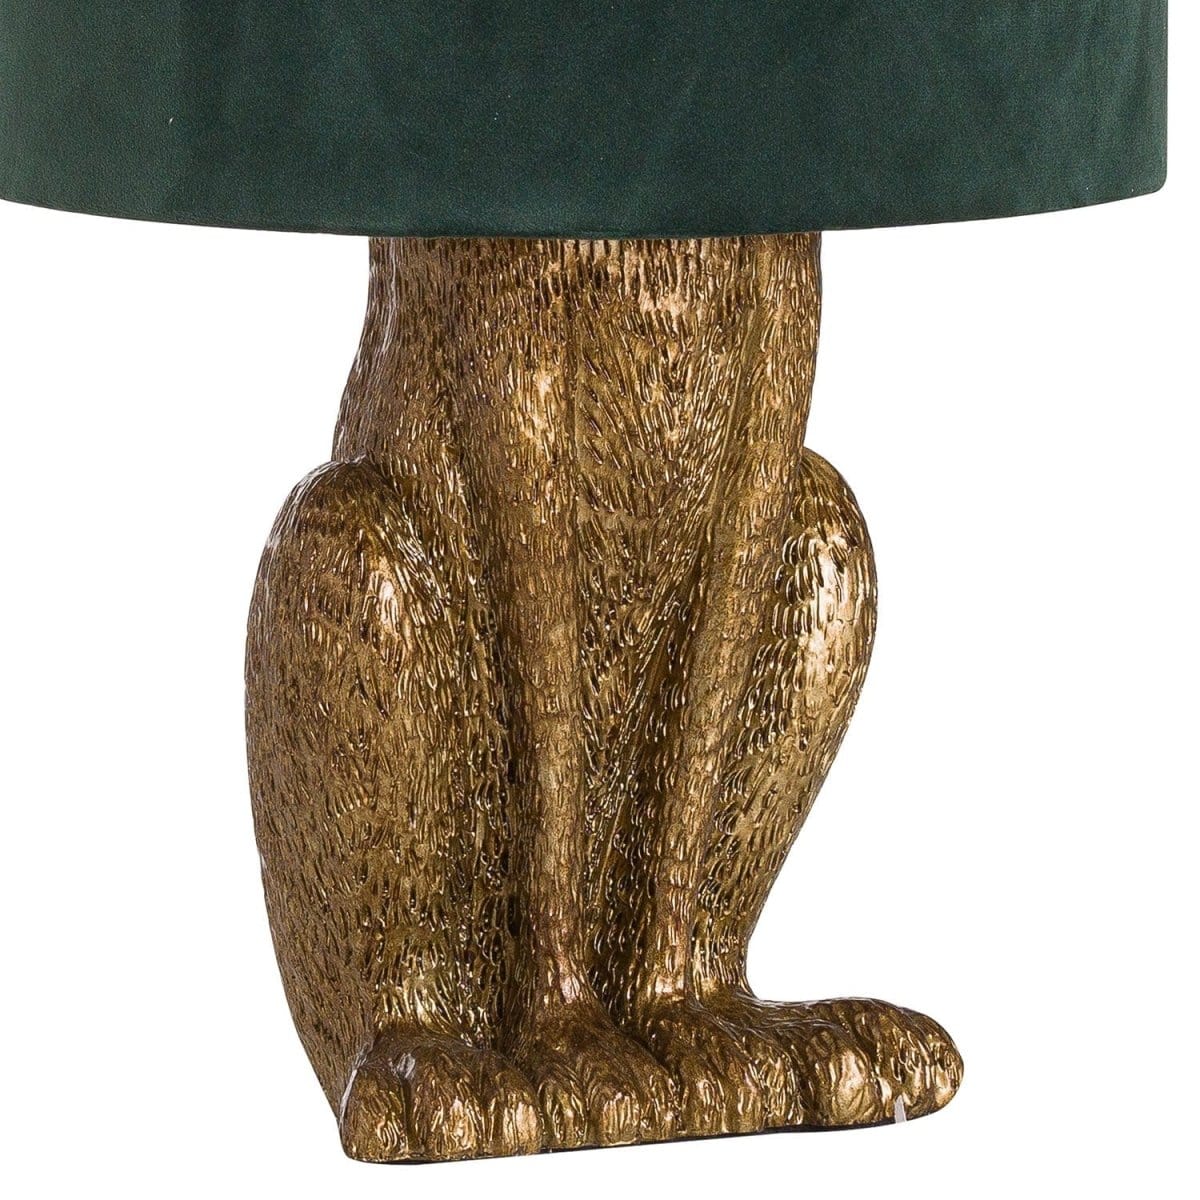 Hill Interiors Table lamp Antique Gold Hare Table Lamp With Green Velvet Shade